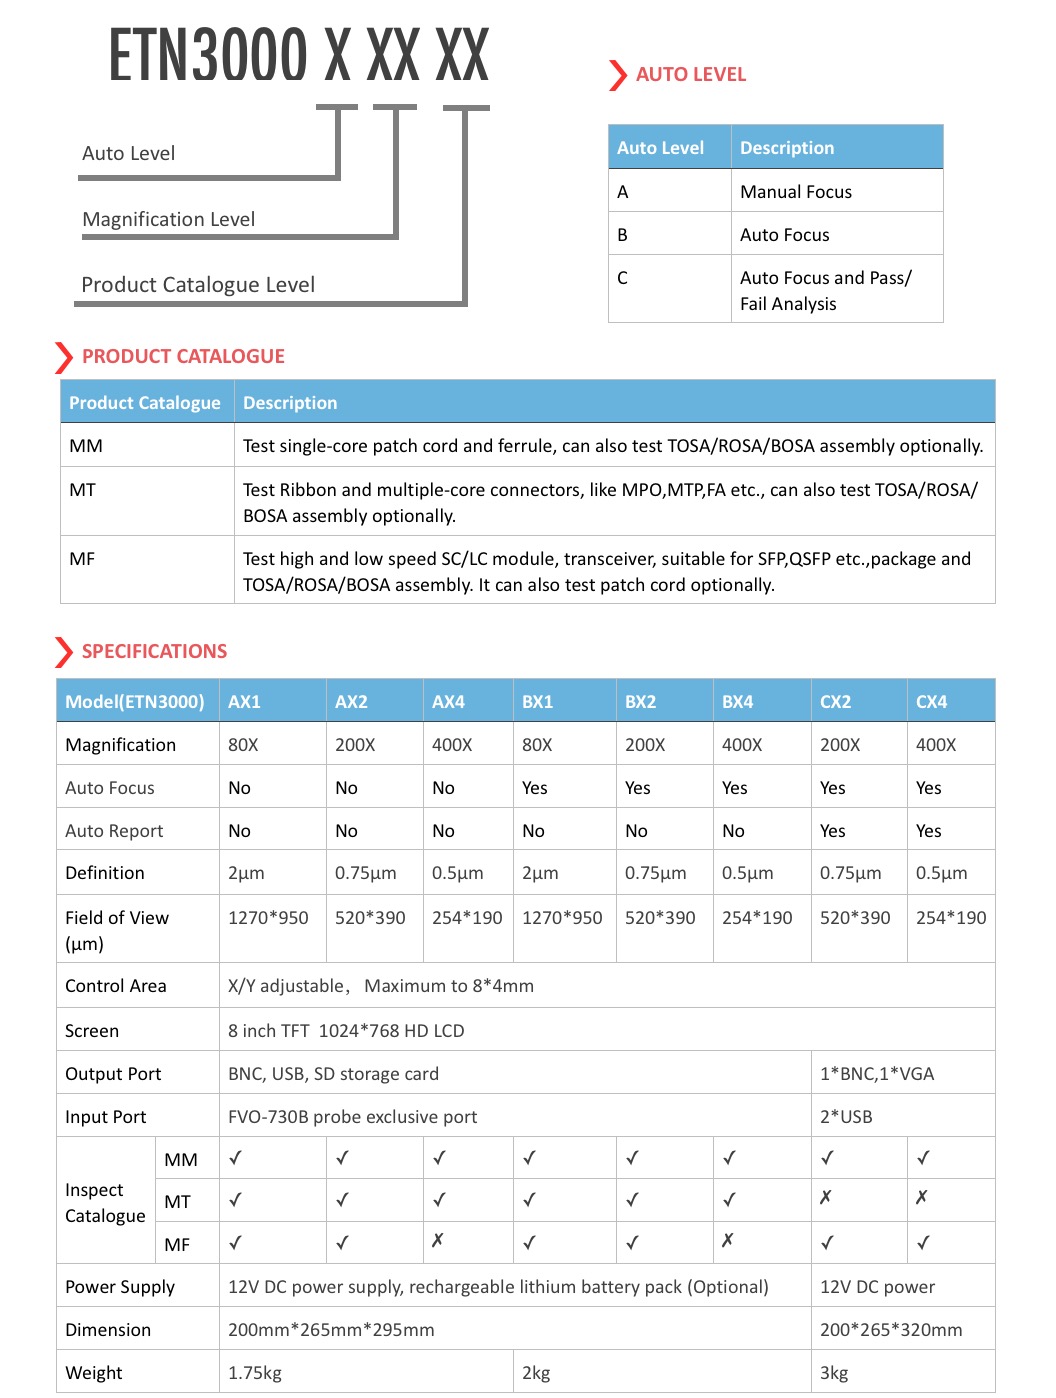 ETN3000B-specification.png